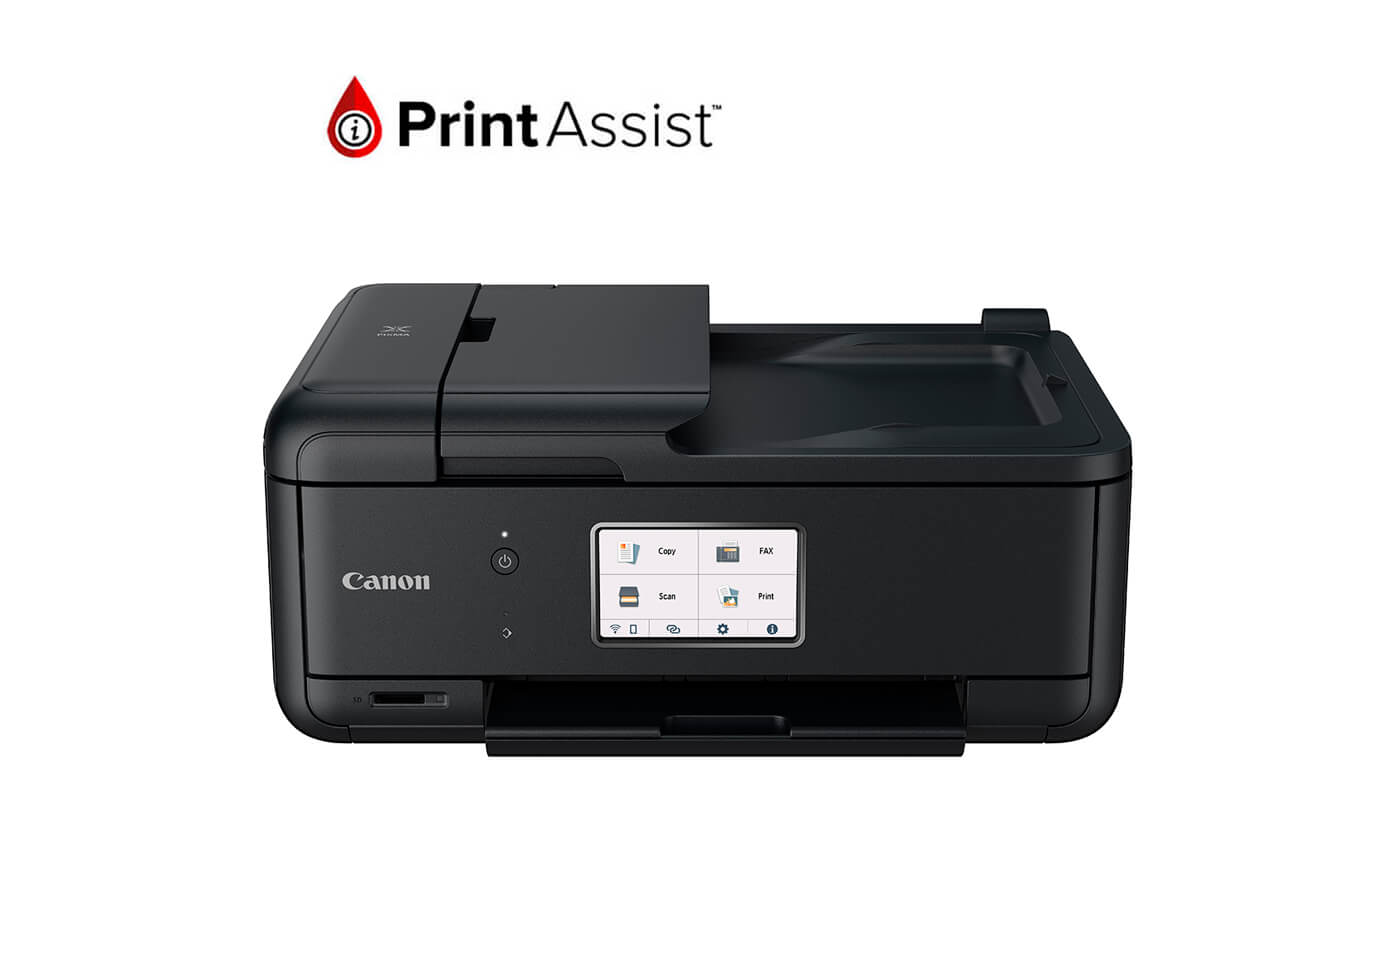 Product image of PIXMA HOME OFFICE TR8660 printer with Print Assist